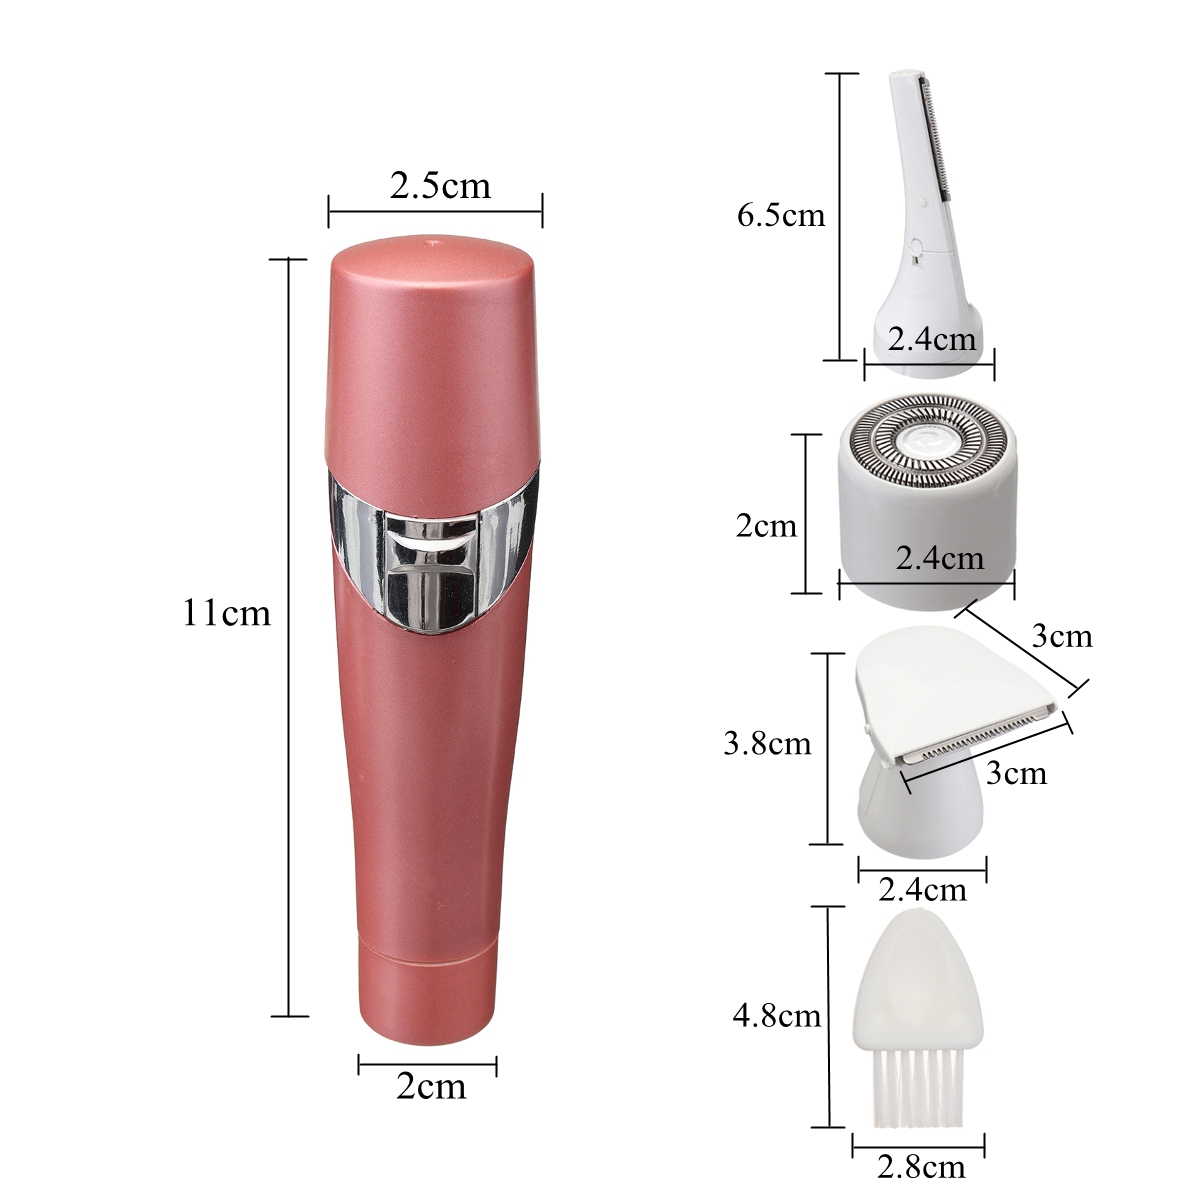 Hair-Removal-Trimmer-3-in-1-Facial-Hair-Remover-Removal-Eyebrow-Hair-Trimmer-1408455